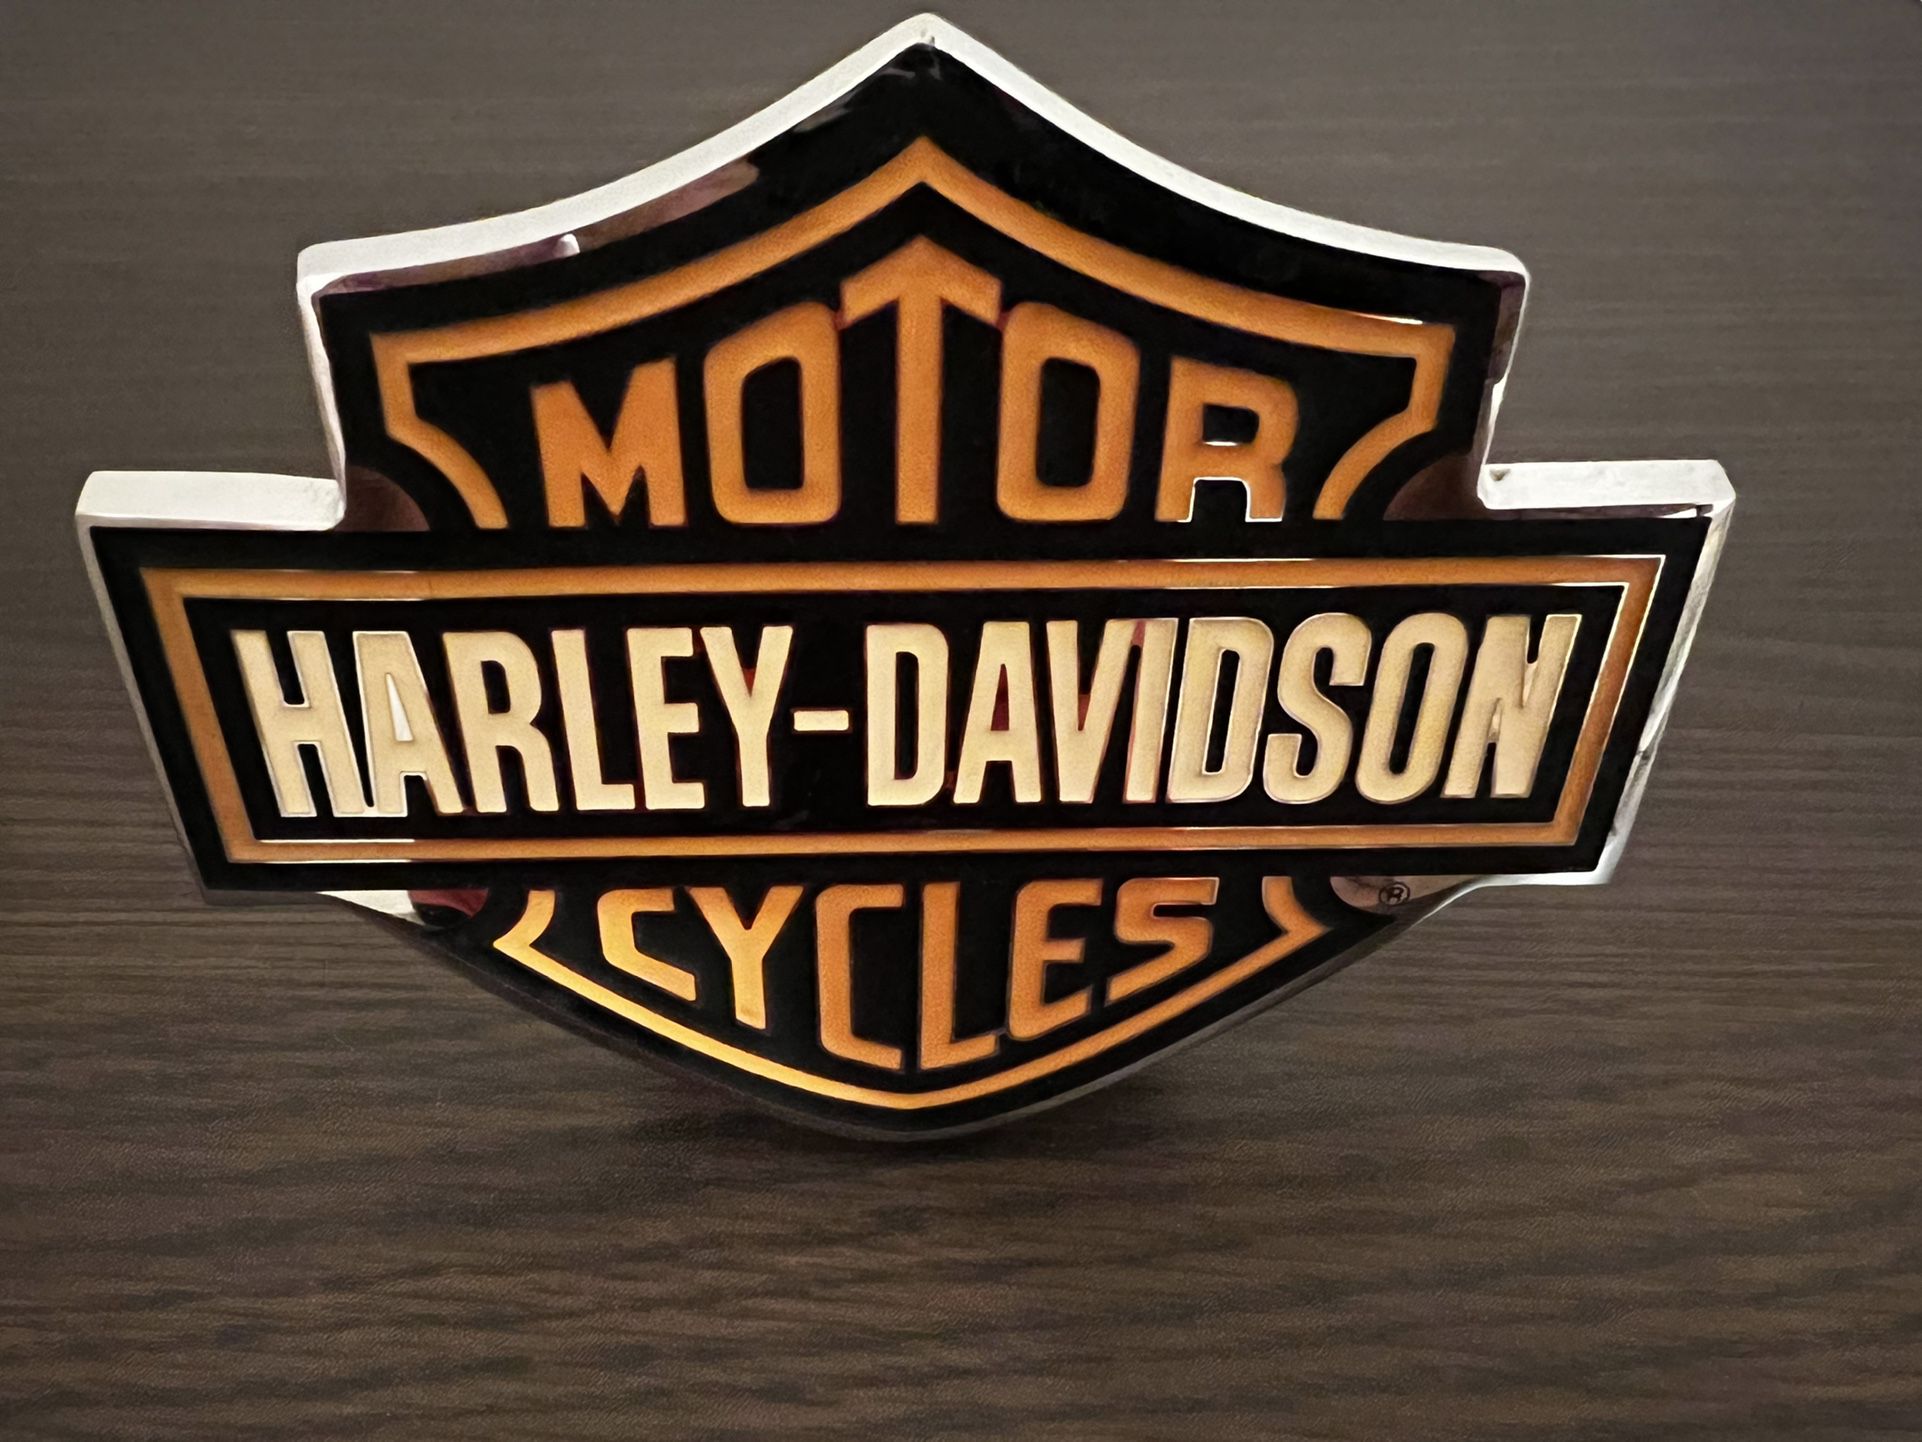 Towing hitch cover Harley Davidson